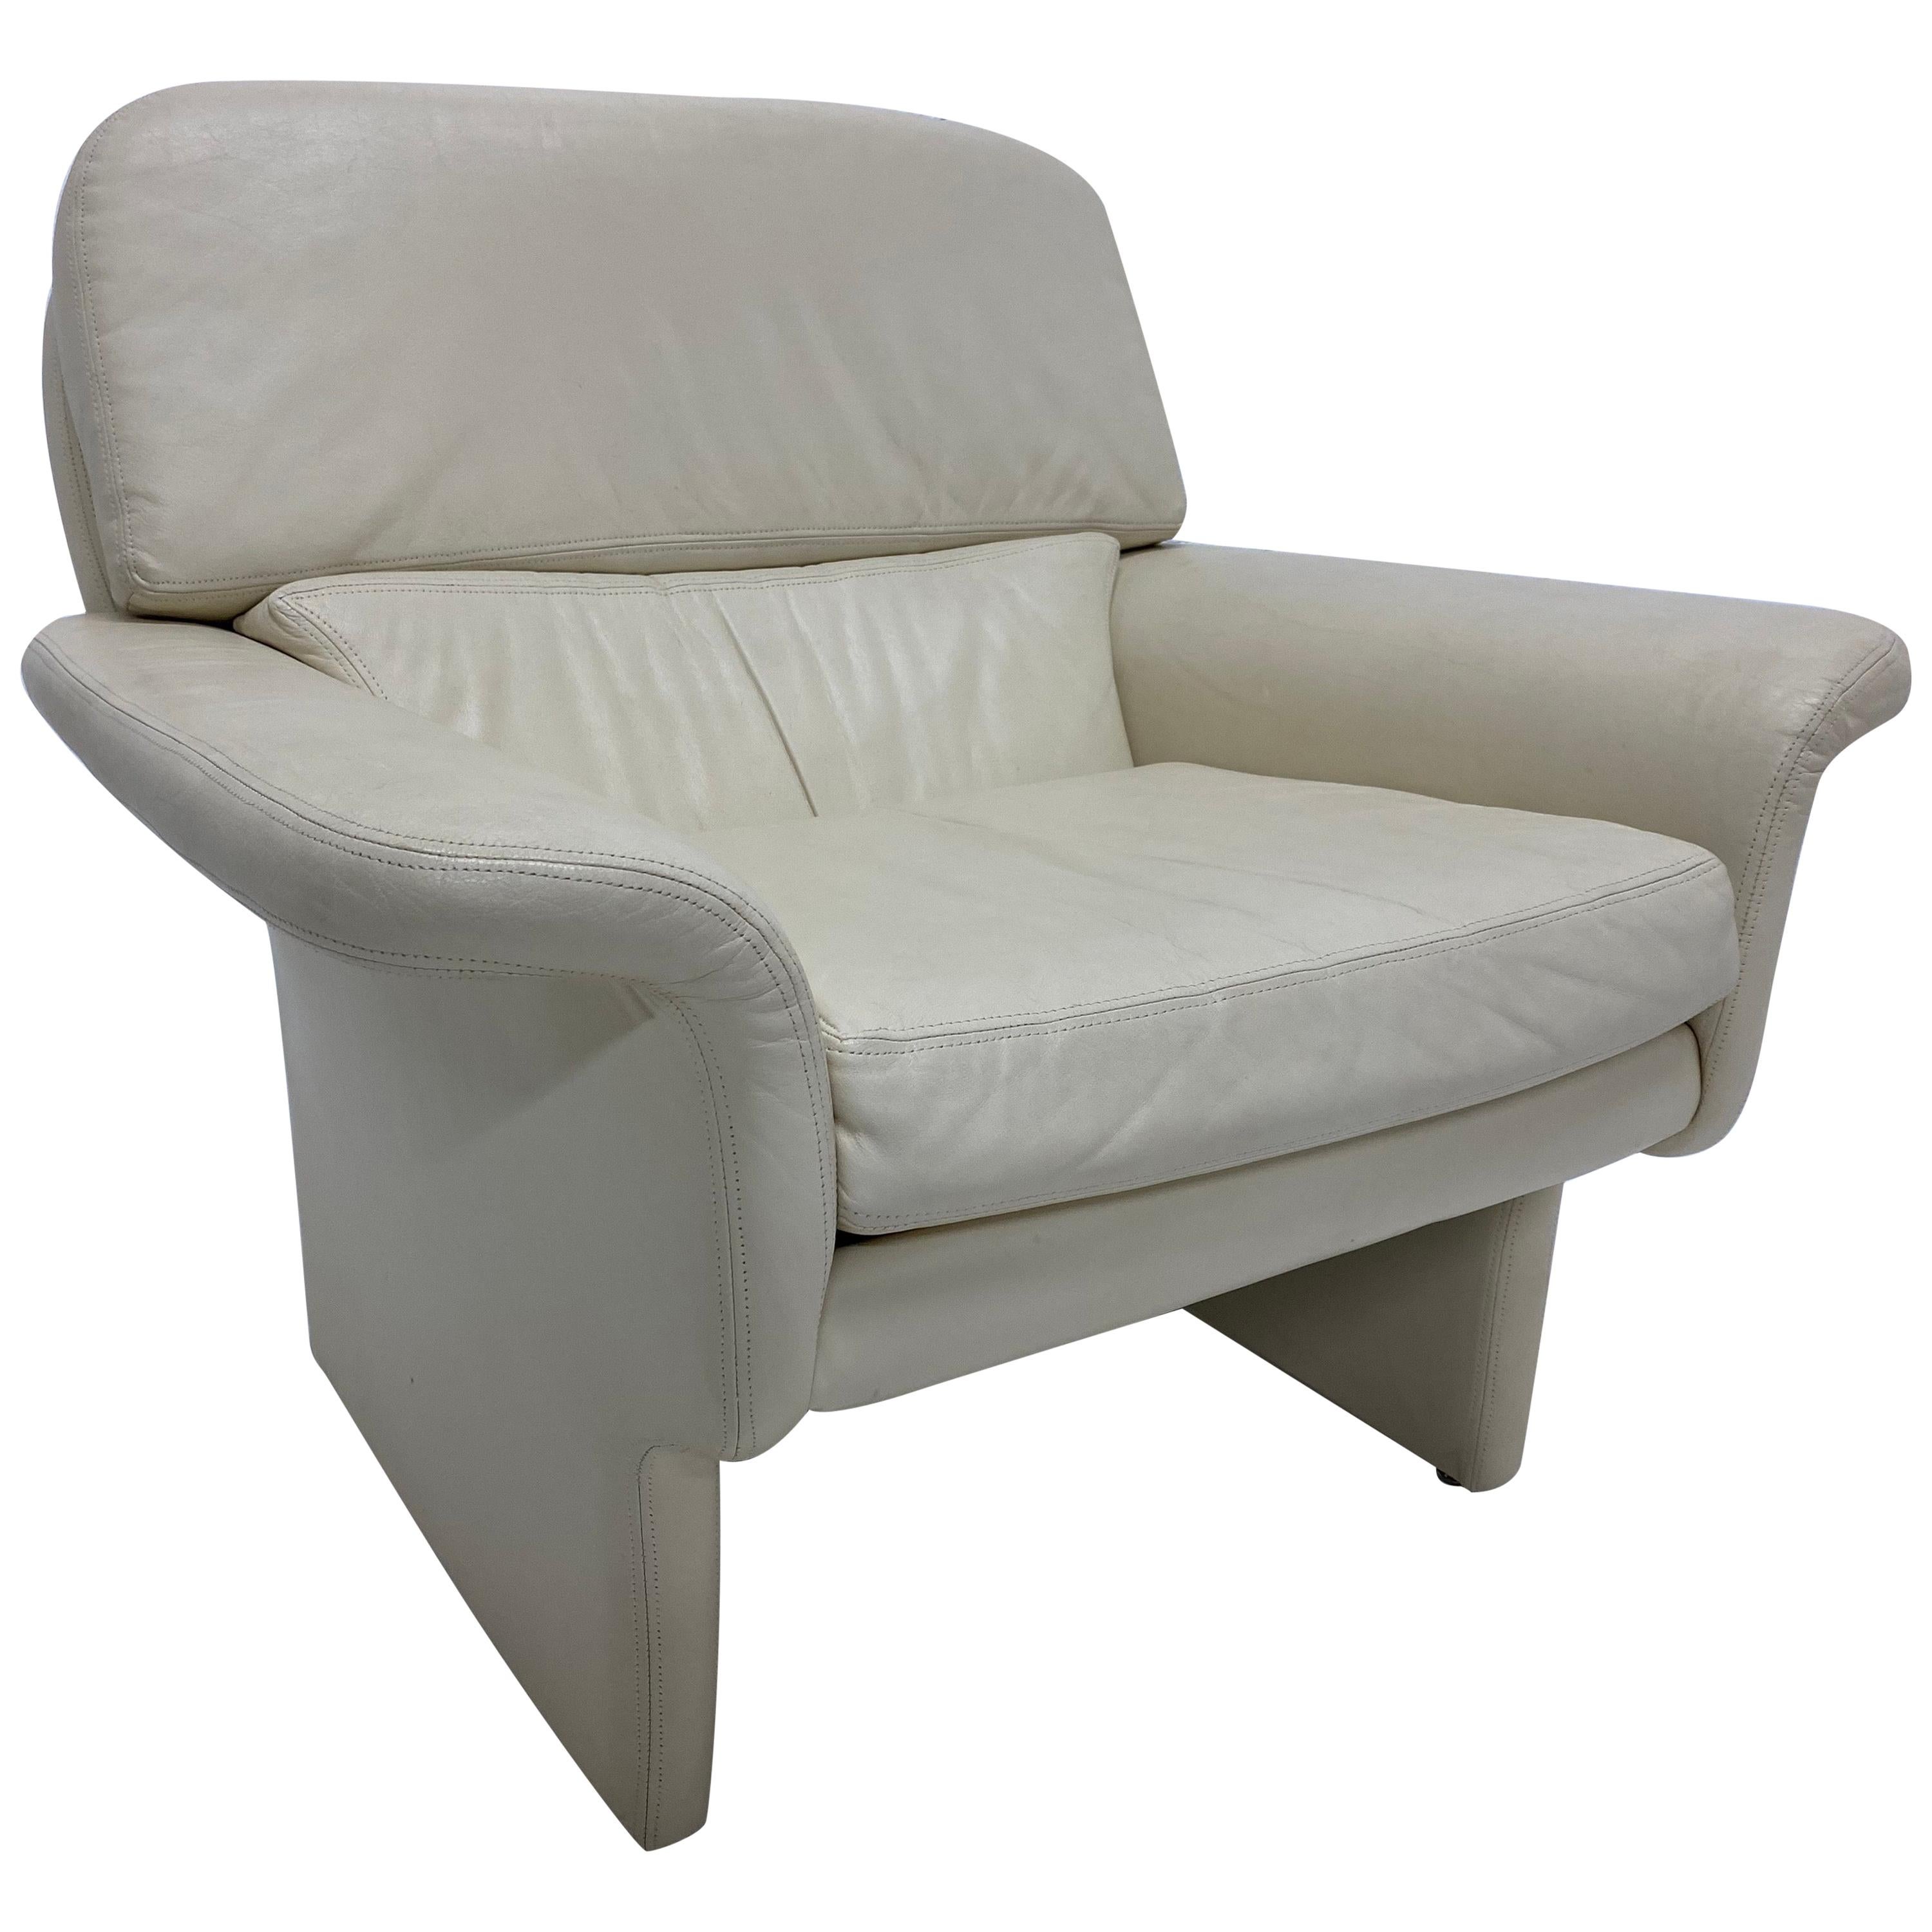 Vladimir Kagan Attr. Cream Leather Lounge Chair for Preview, 1980s